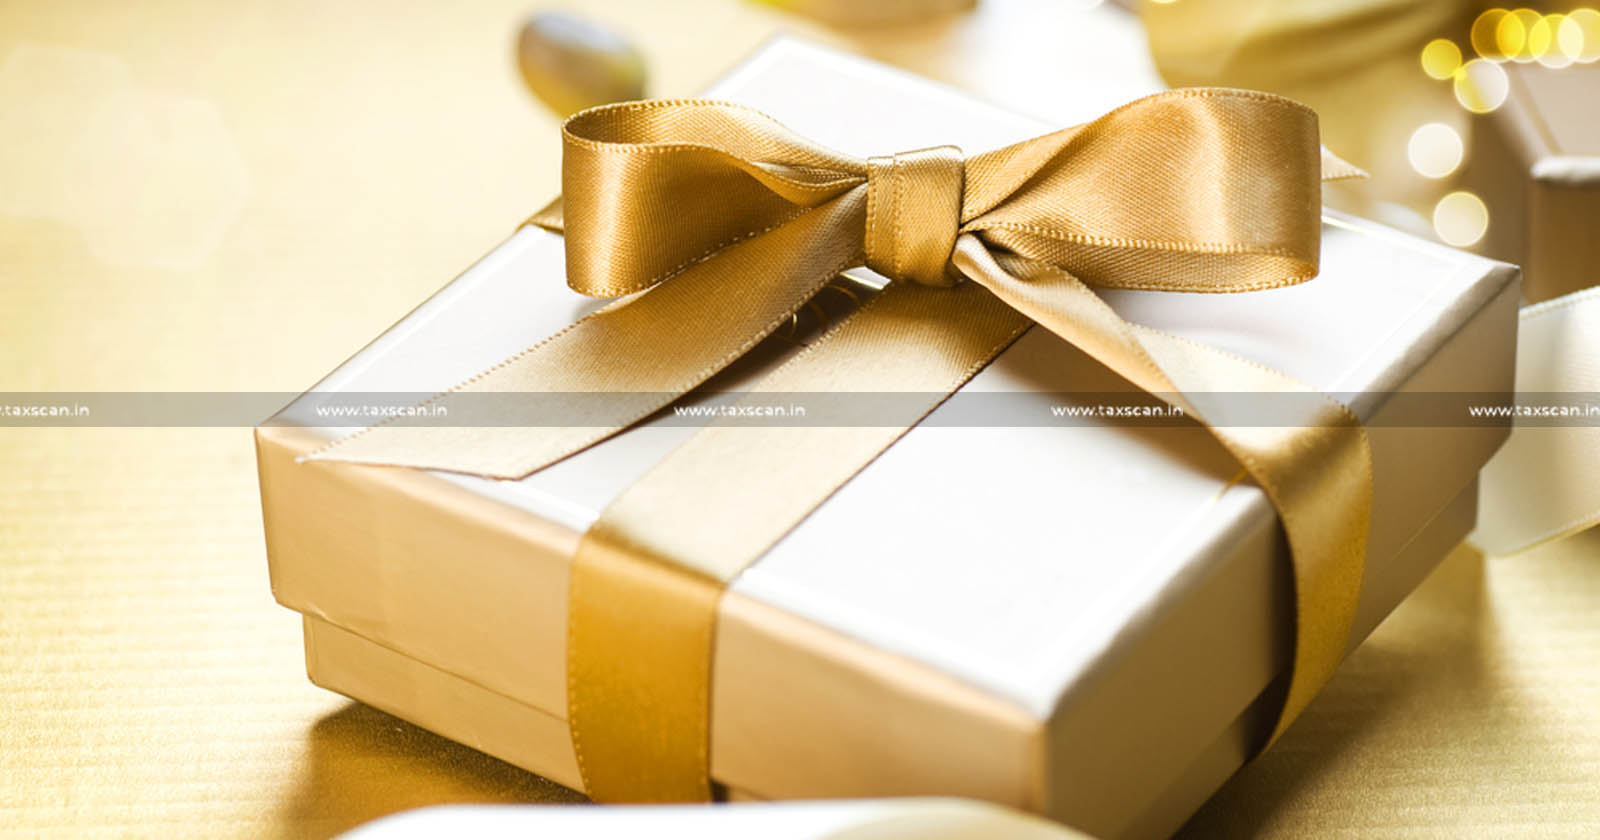 Gifts - Dealers - Gifts to Dealers - Shagun - Marriage of Dealers - Marriage of Dealers and Staff - Business Promotion - Social Welfare - Deductible - ITAT - Taxscan